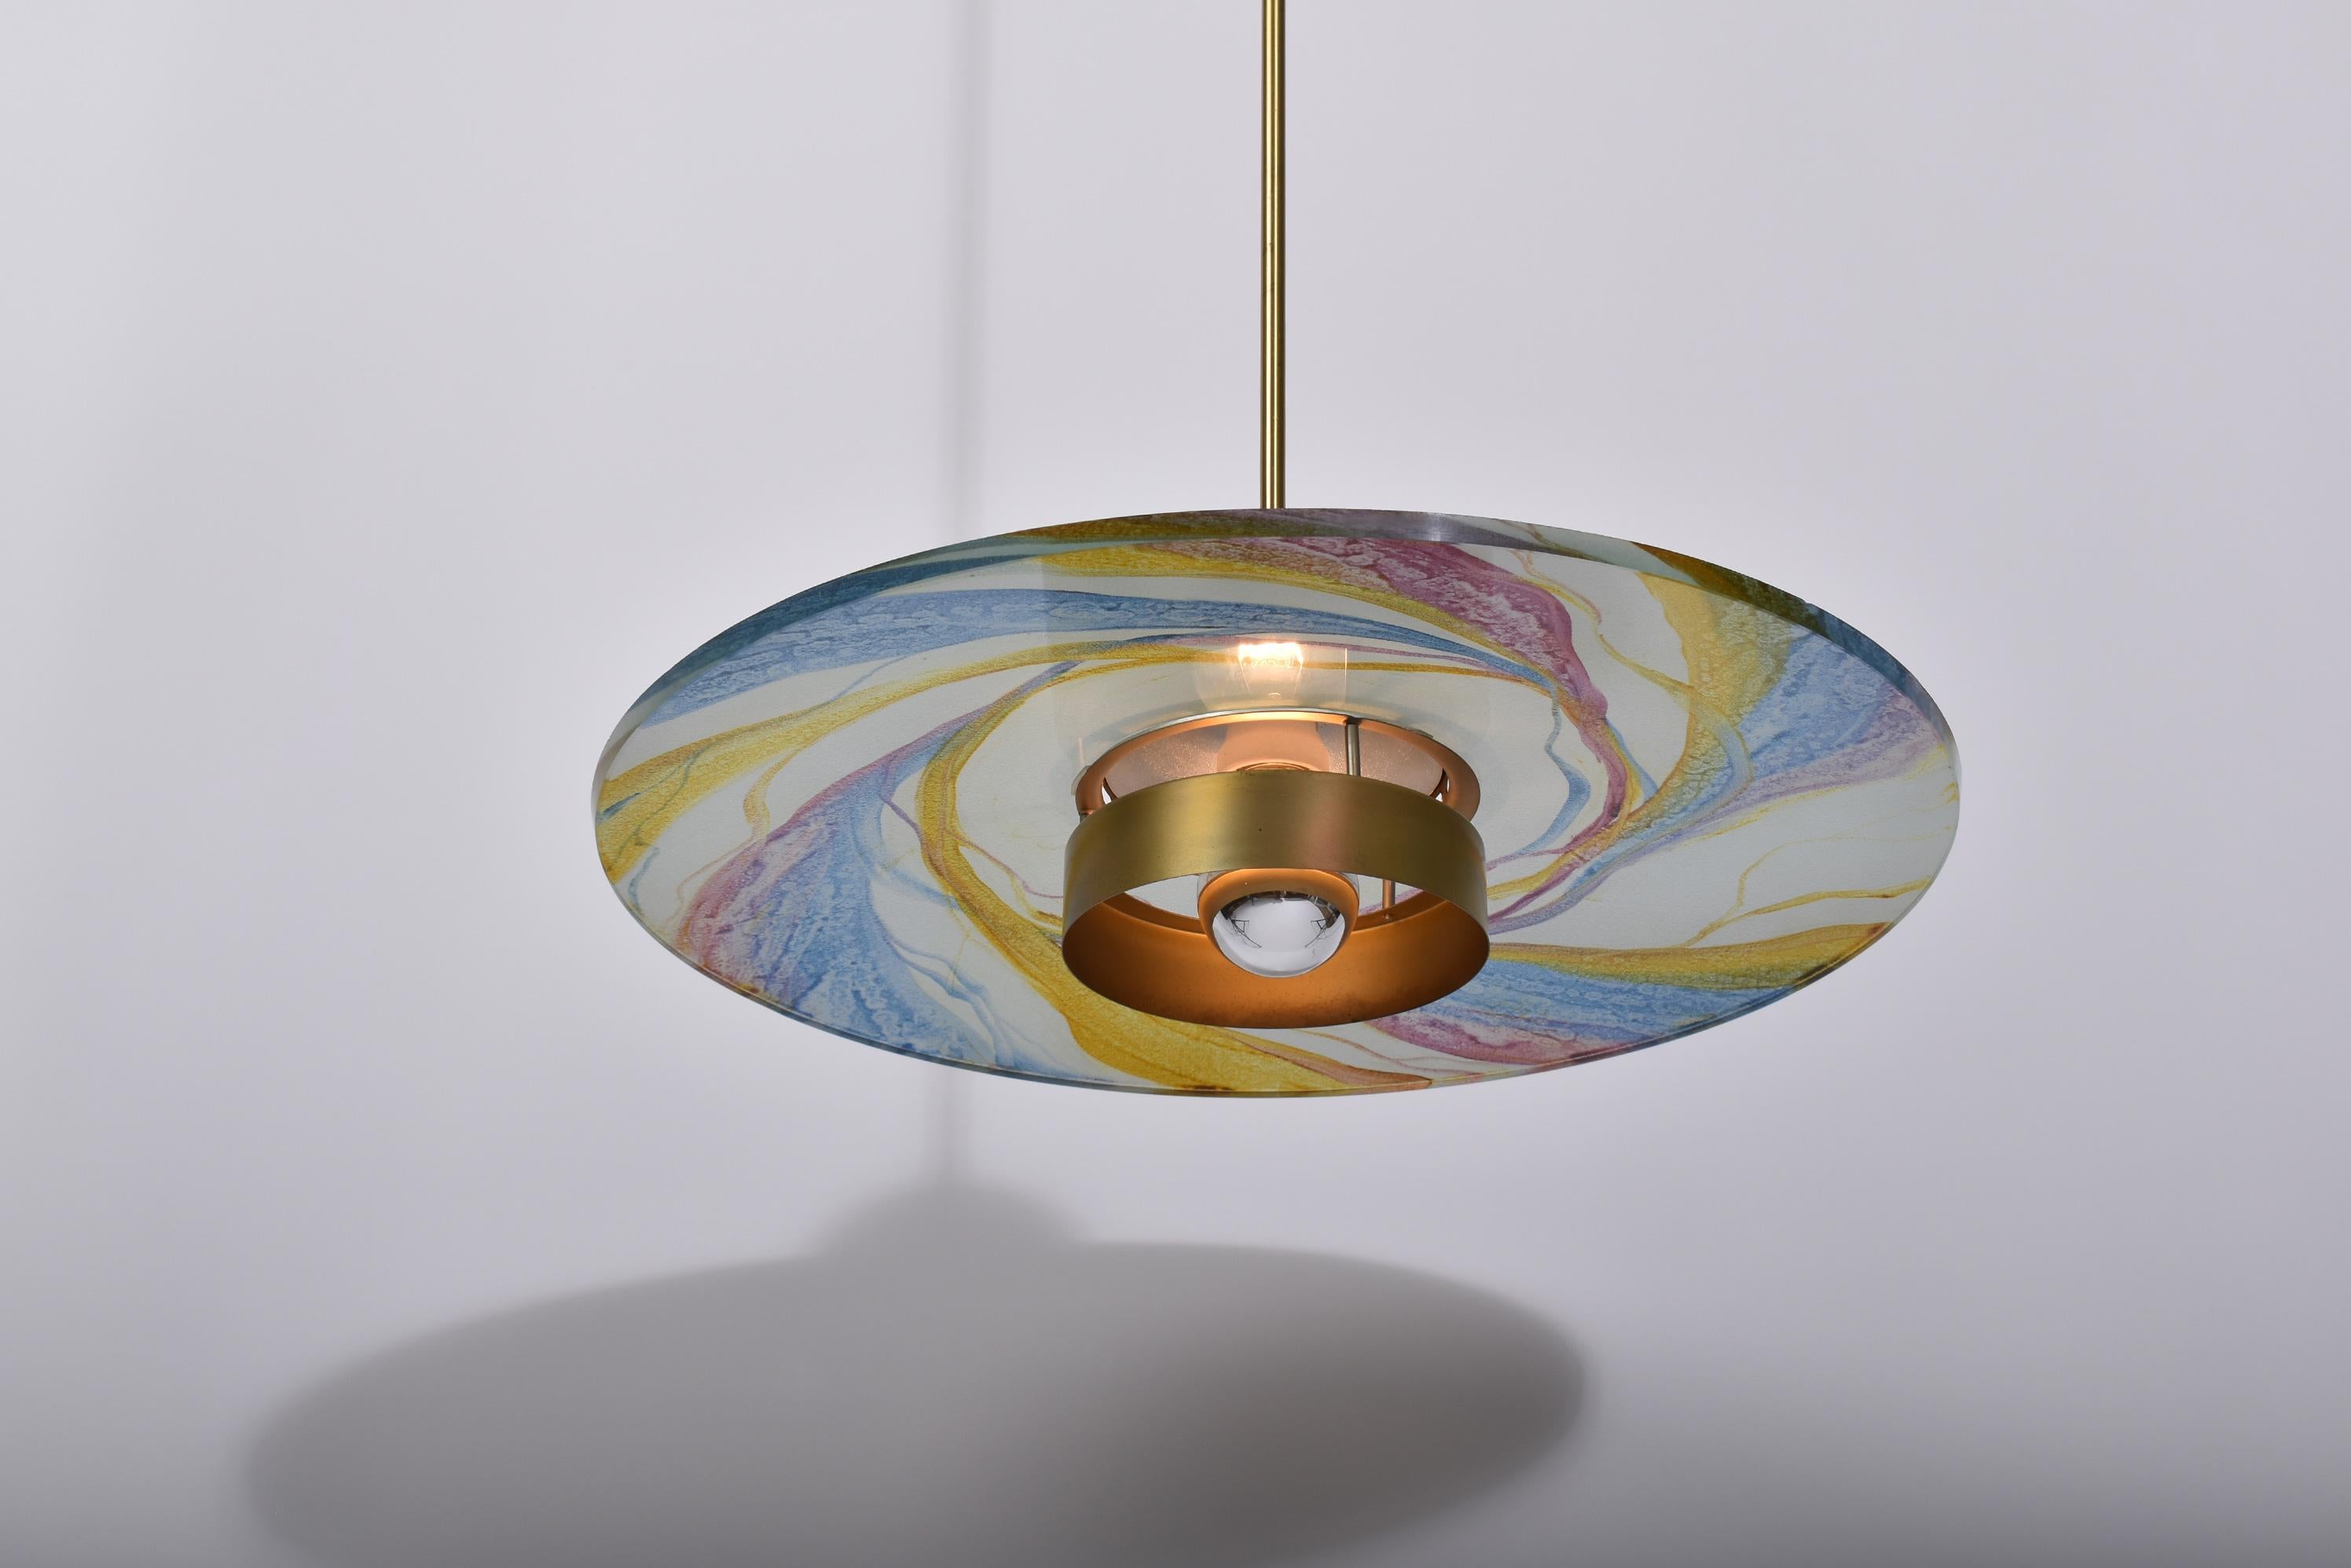 Hand-Painted Post-Modern Hand Painted Glass Pendant Lamp by Sische, Germany 1988